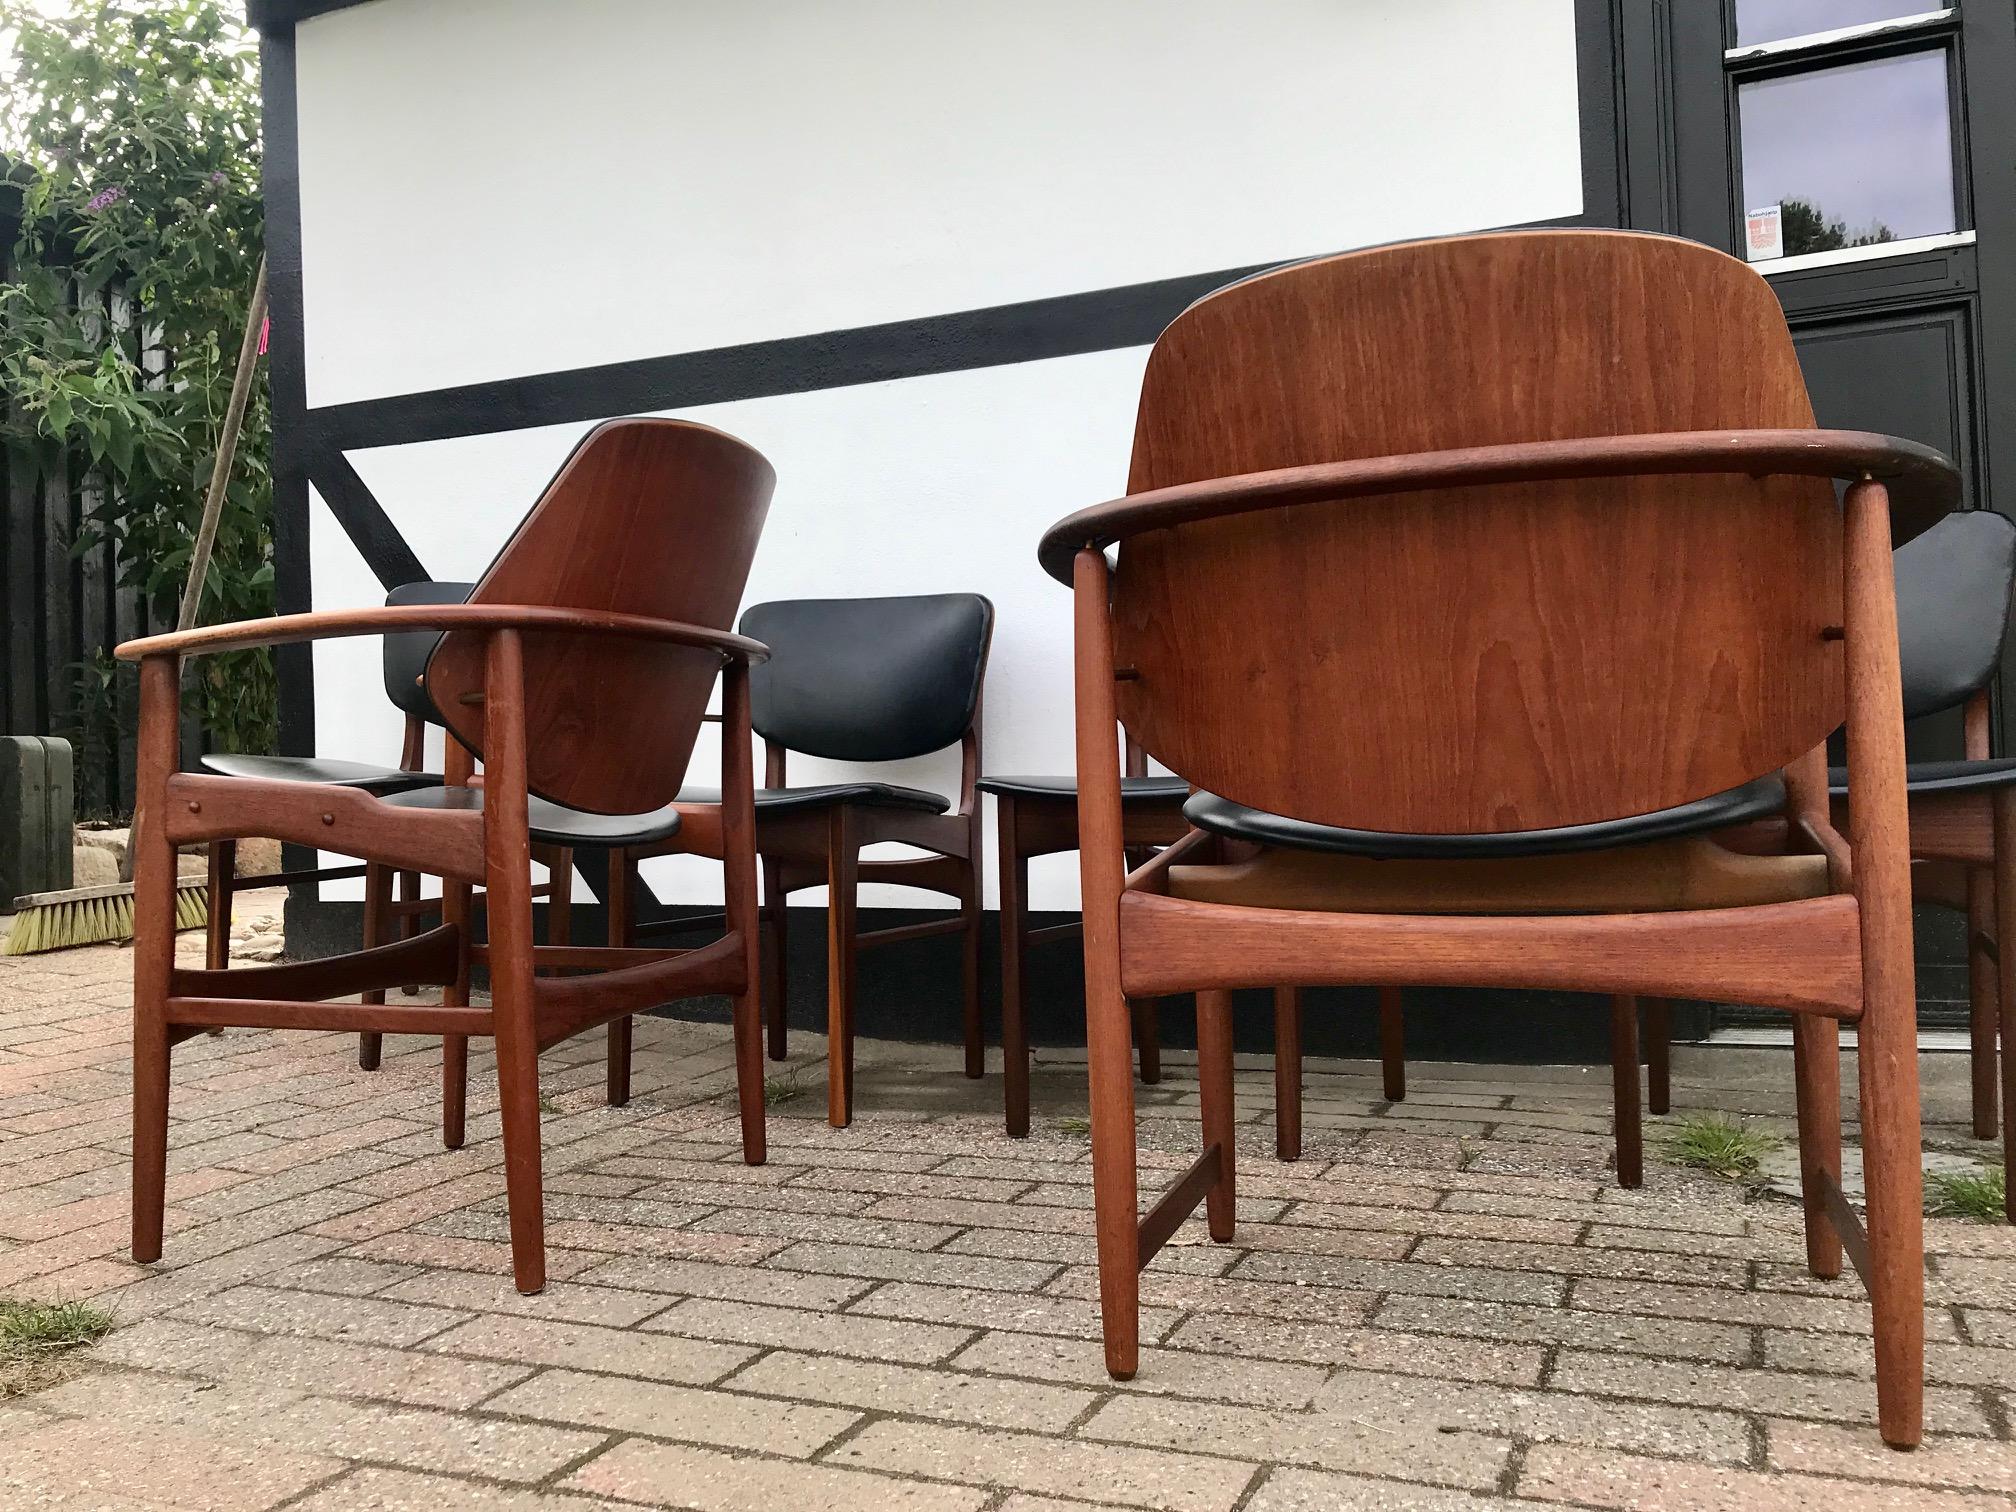 Dining set of chairs consisting of two armchairs. The fathers chair alias the King chair and the mothers chair alias the Queen chair. These features subtle yet similar design features. The two armchairs are designed in such a manner that the 'arms'